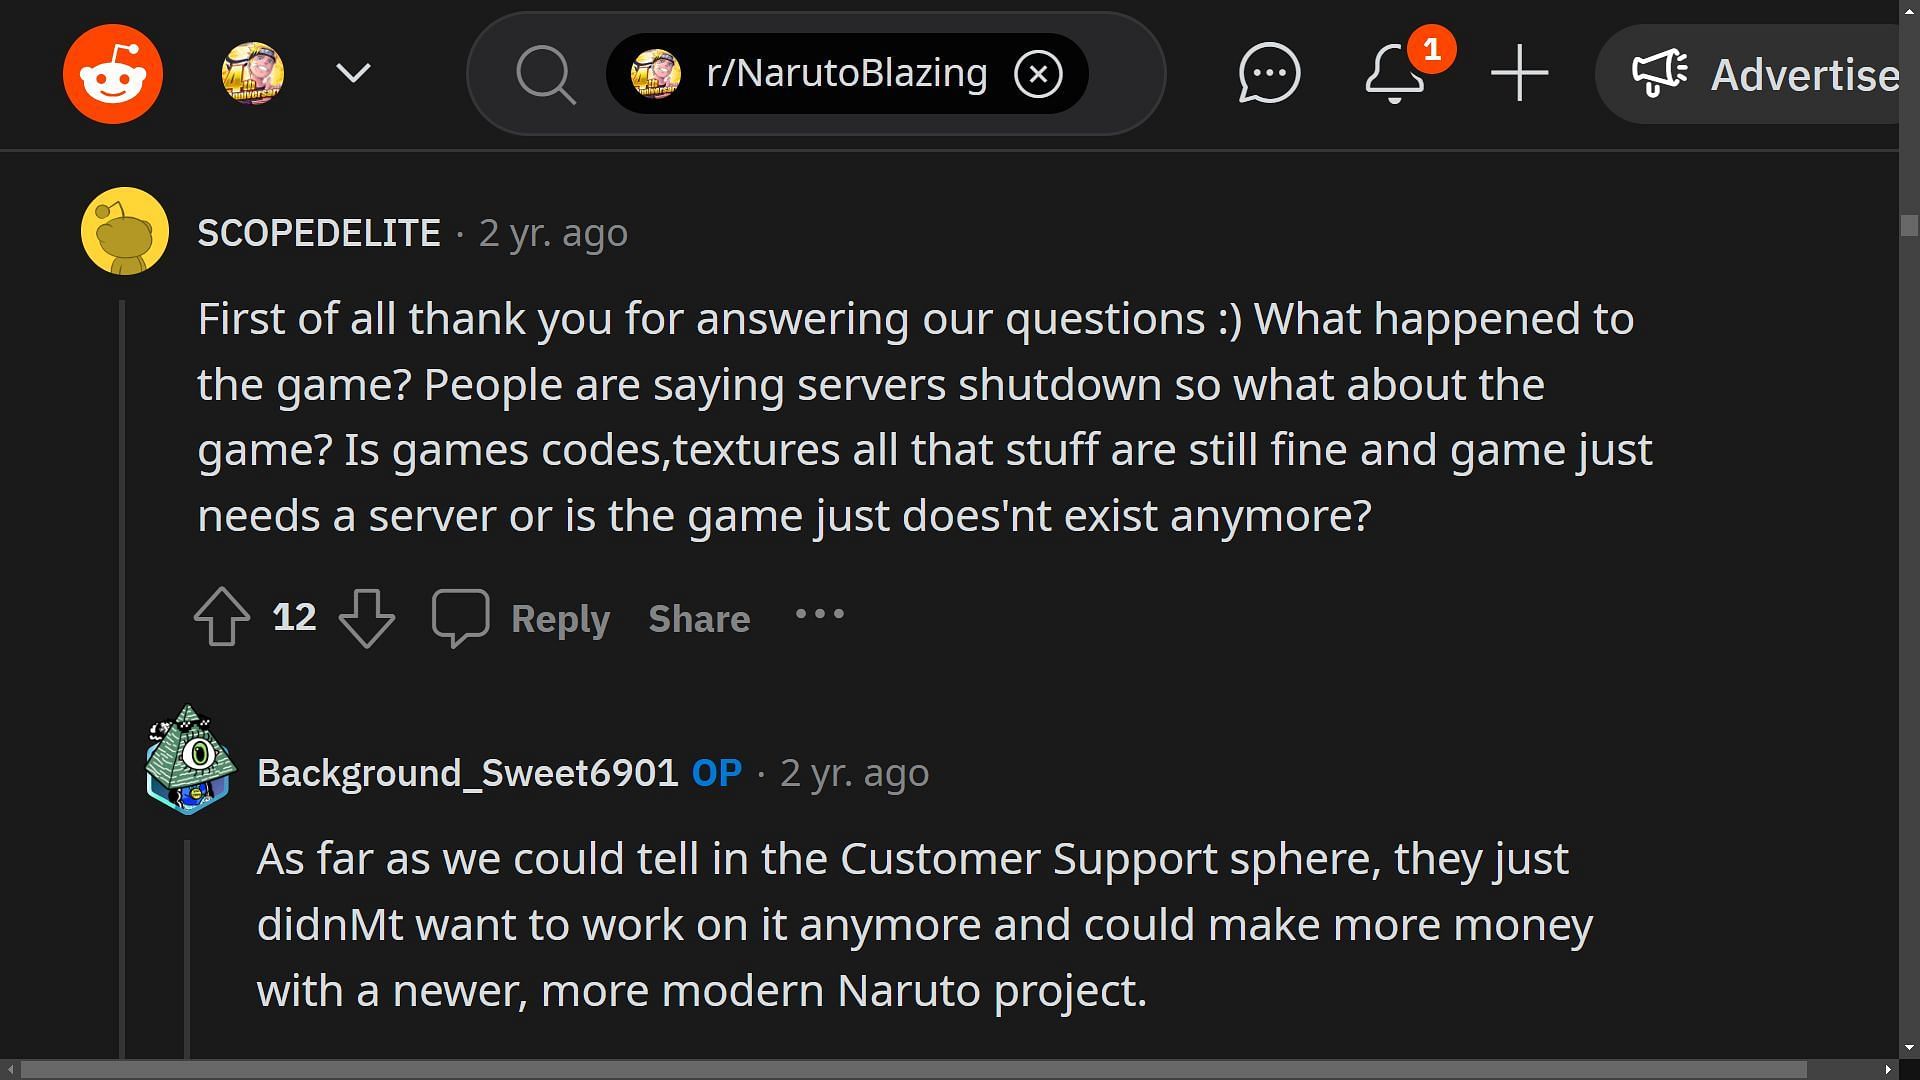 The person in the subreddit also explained how Bandai Namco wanted to focus their efforts on a new project (Screengrab via Reddit thread r/NarutoBlazing)